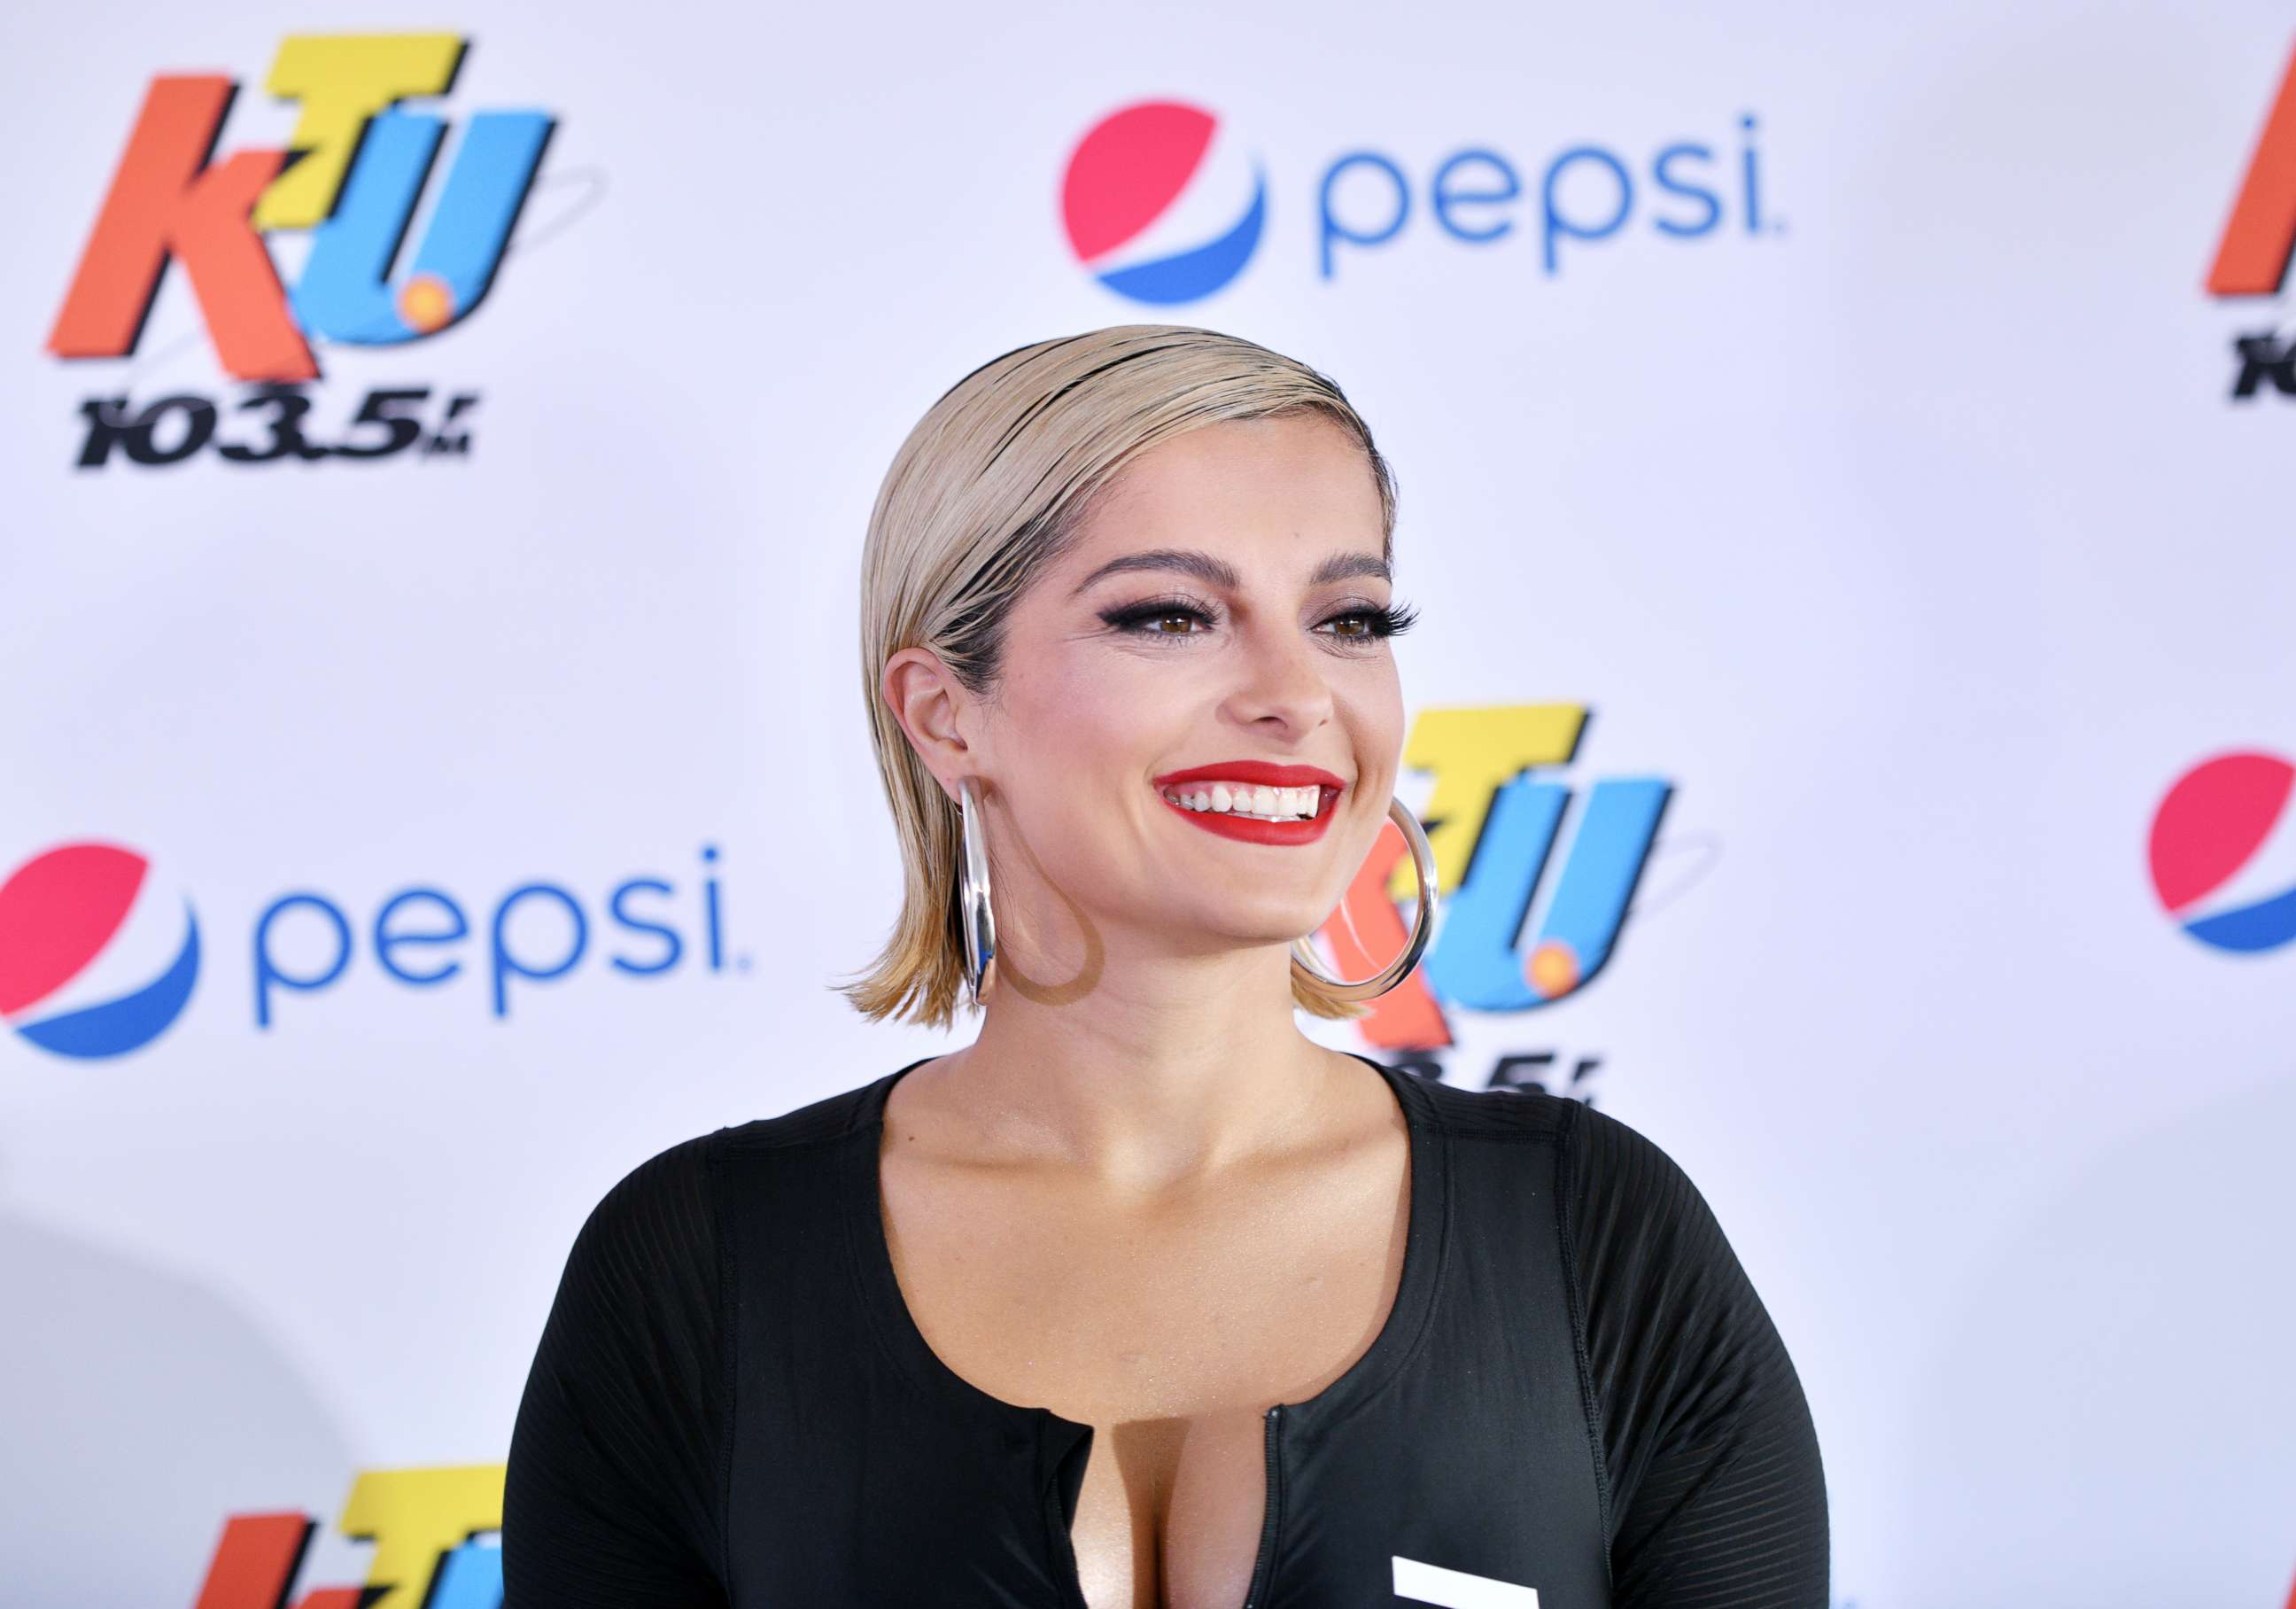 PHOTO: Bebe Rexha poses backstage during 2019 103.5 KTU KTUphoria presented by Pepsi at Northwell Health at Jones Beach Theater, June 15, 2019, in Wantagh, New York.